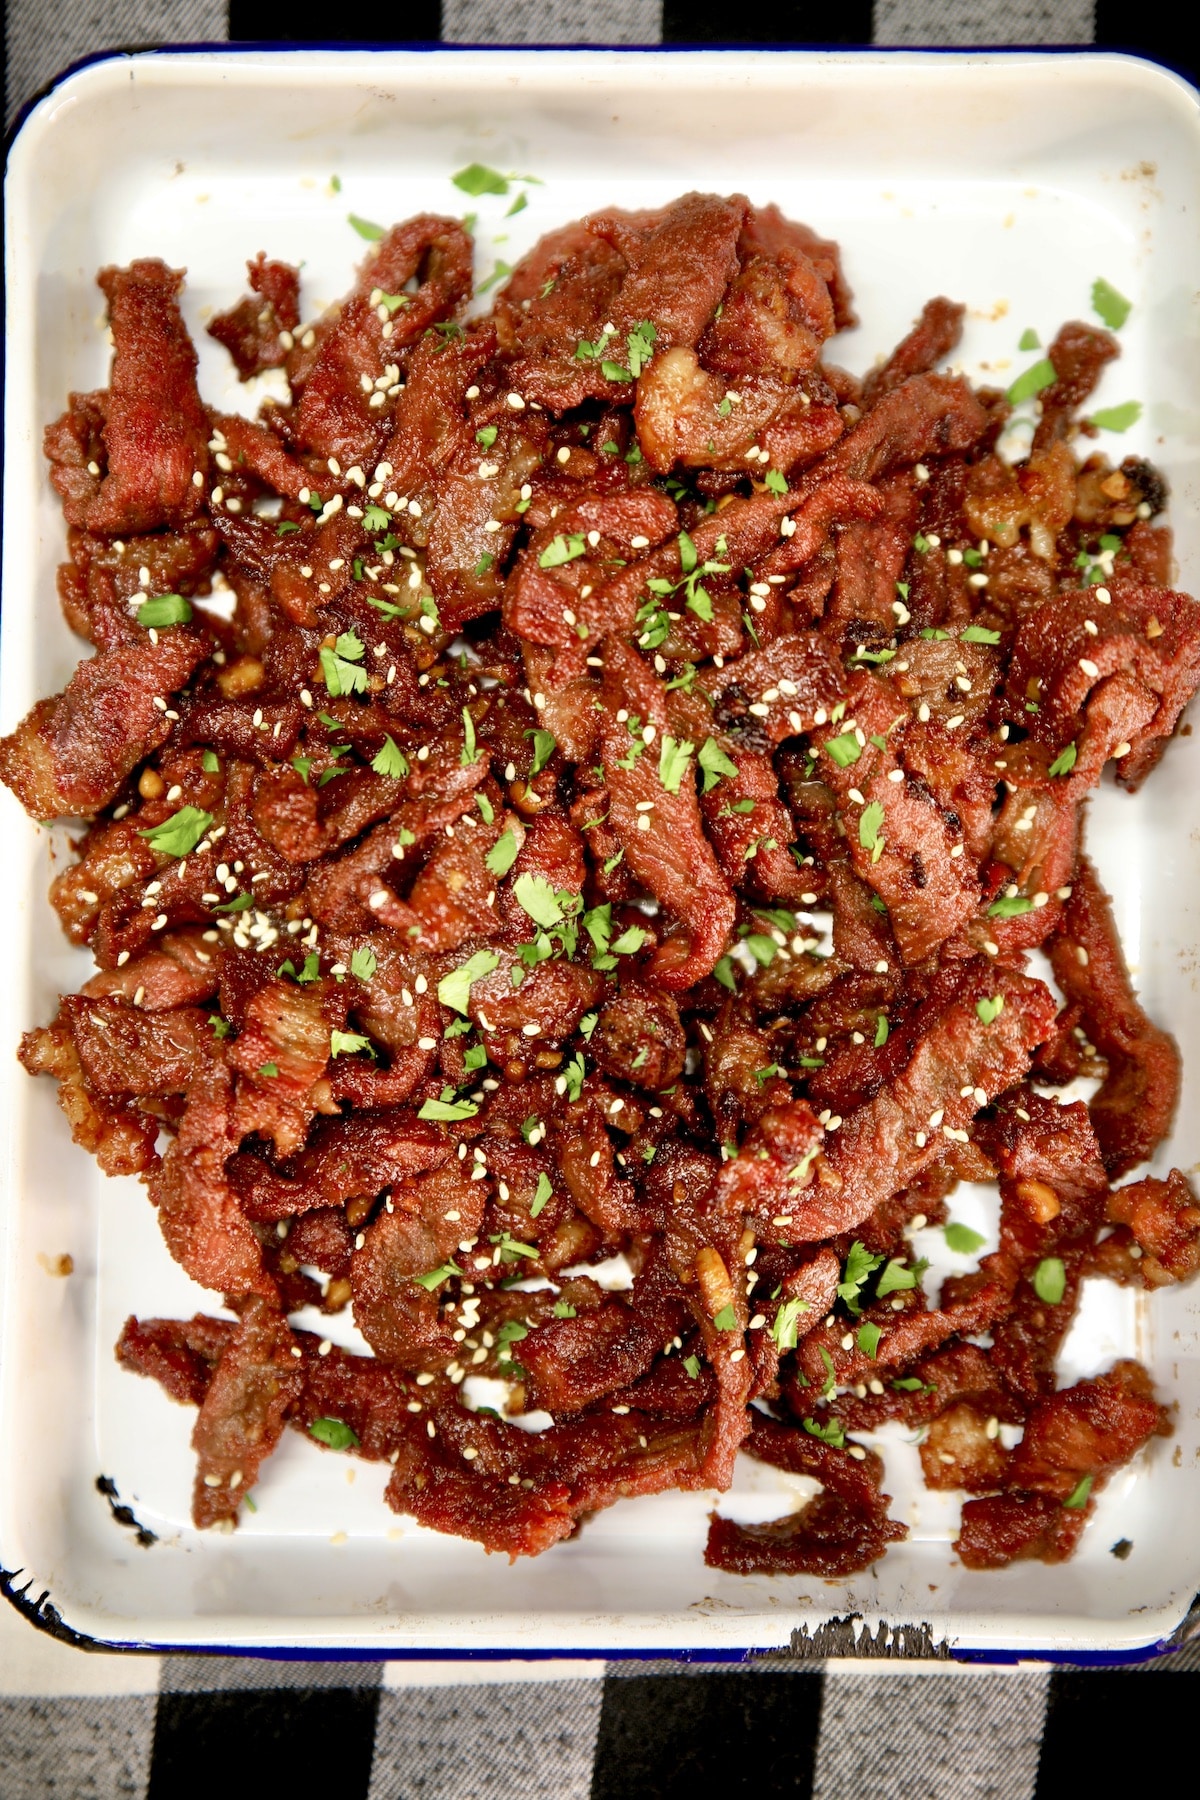 Thin sliced Asian steak with cilantro and sesame seeds.